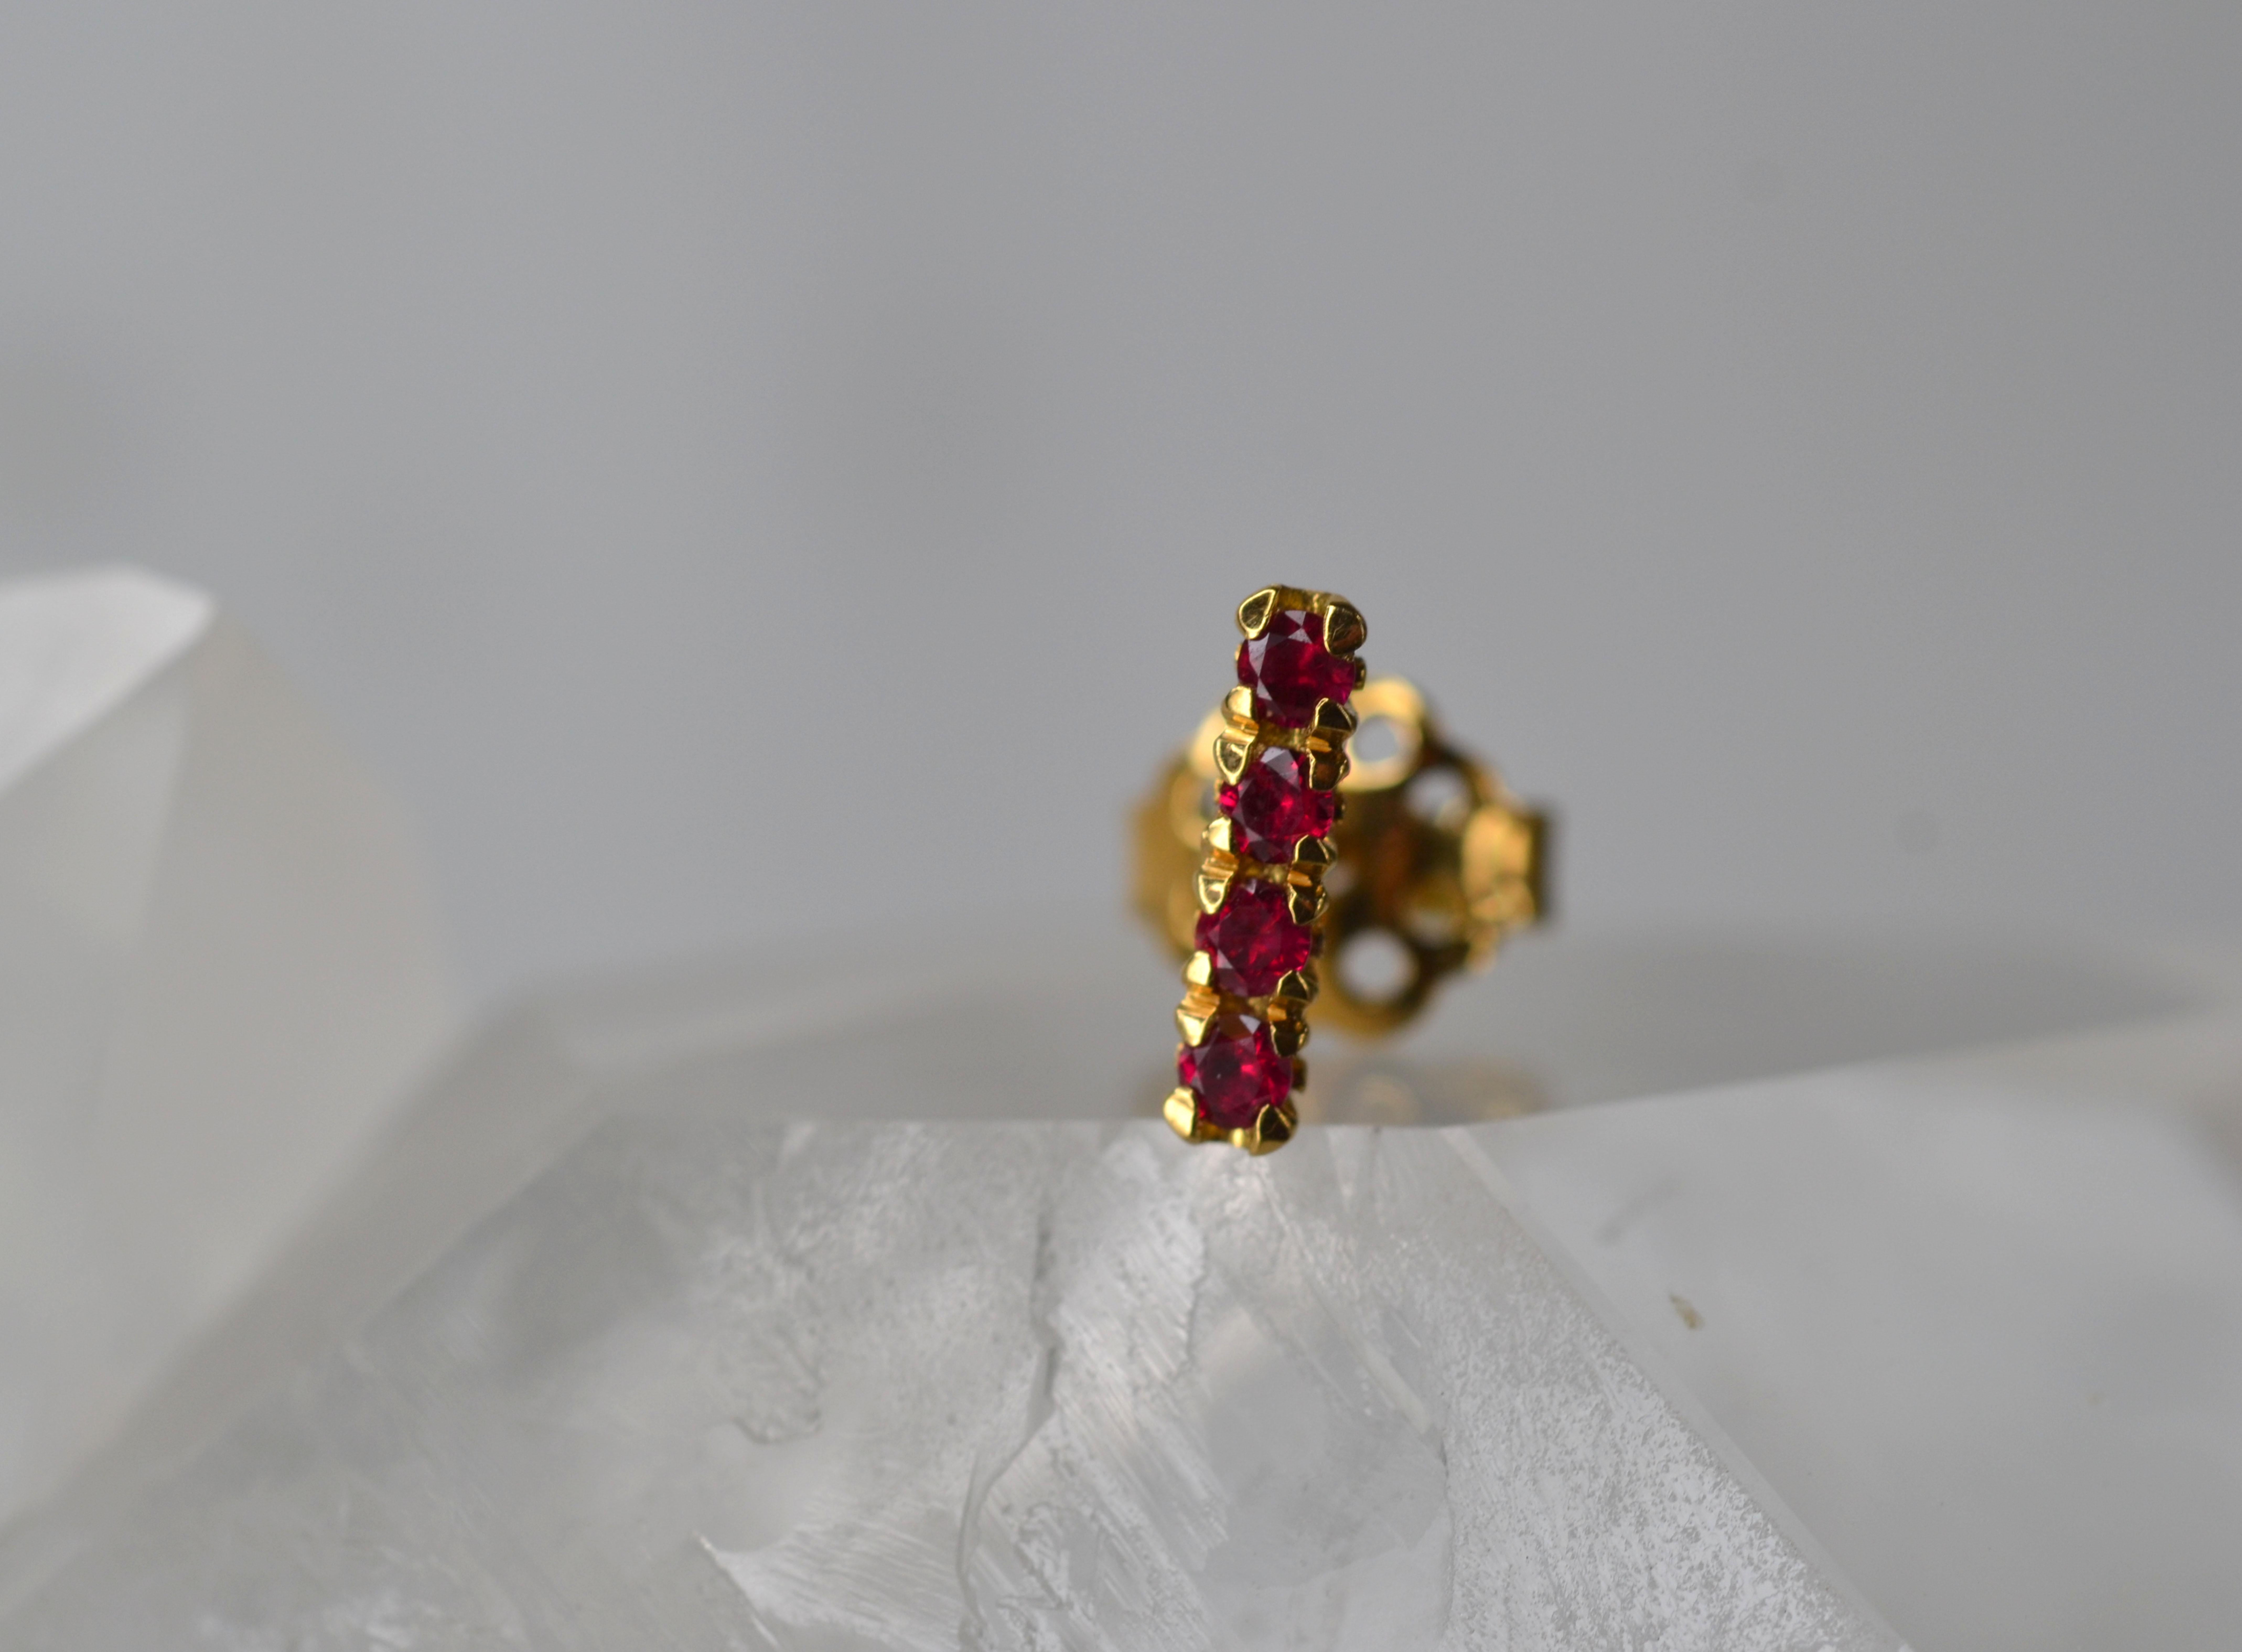 This single earring stud is part of our Blossom Collection of mix and match pieces. The vibrant rubies are set on an 18k gold blossom flower collet to be worn alongside your favourite pair of earrings, our blossom hoops, or combine with any other